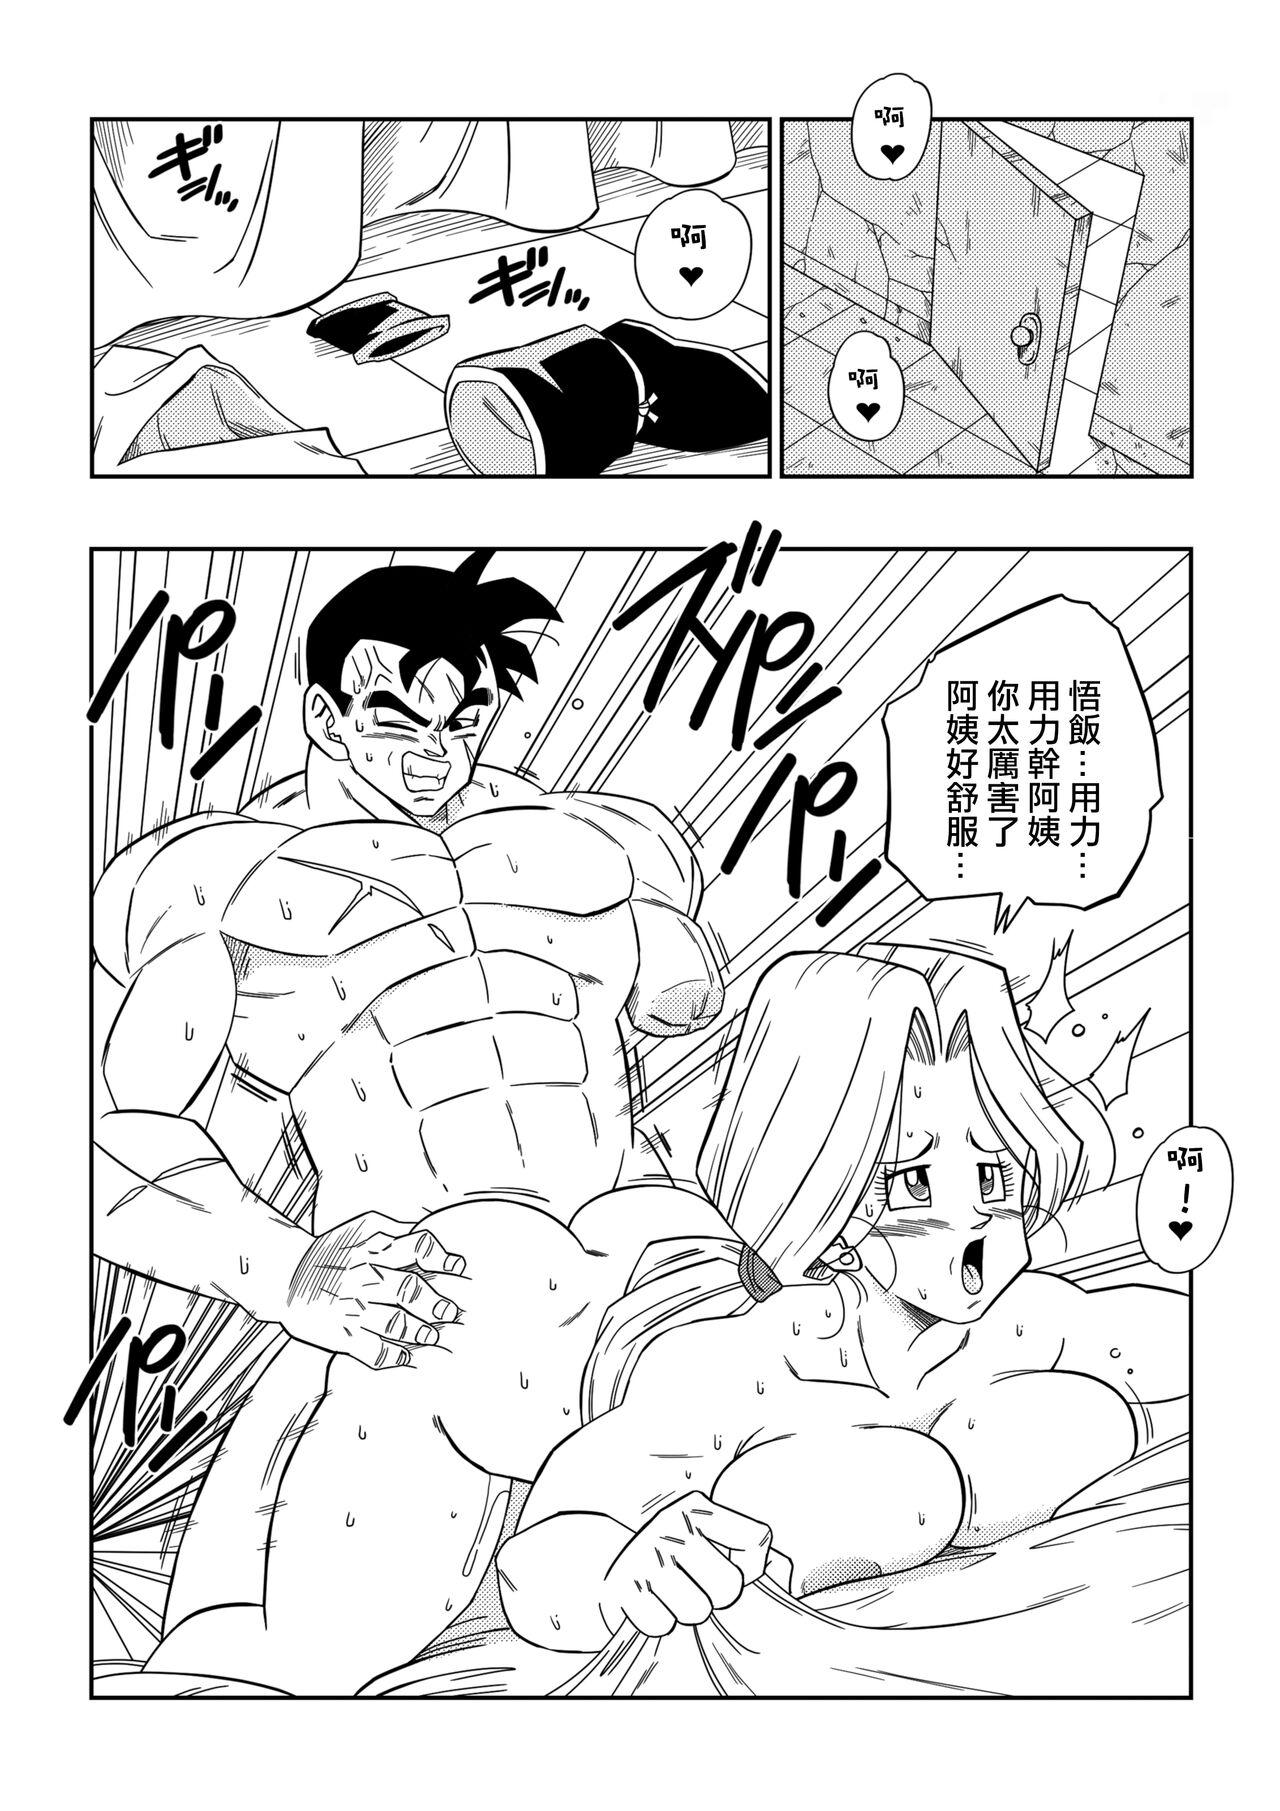 Lost of sex in this Future! - BULMA and GOHAN 5